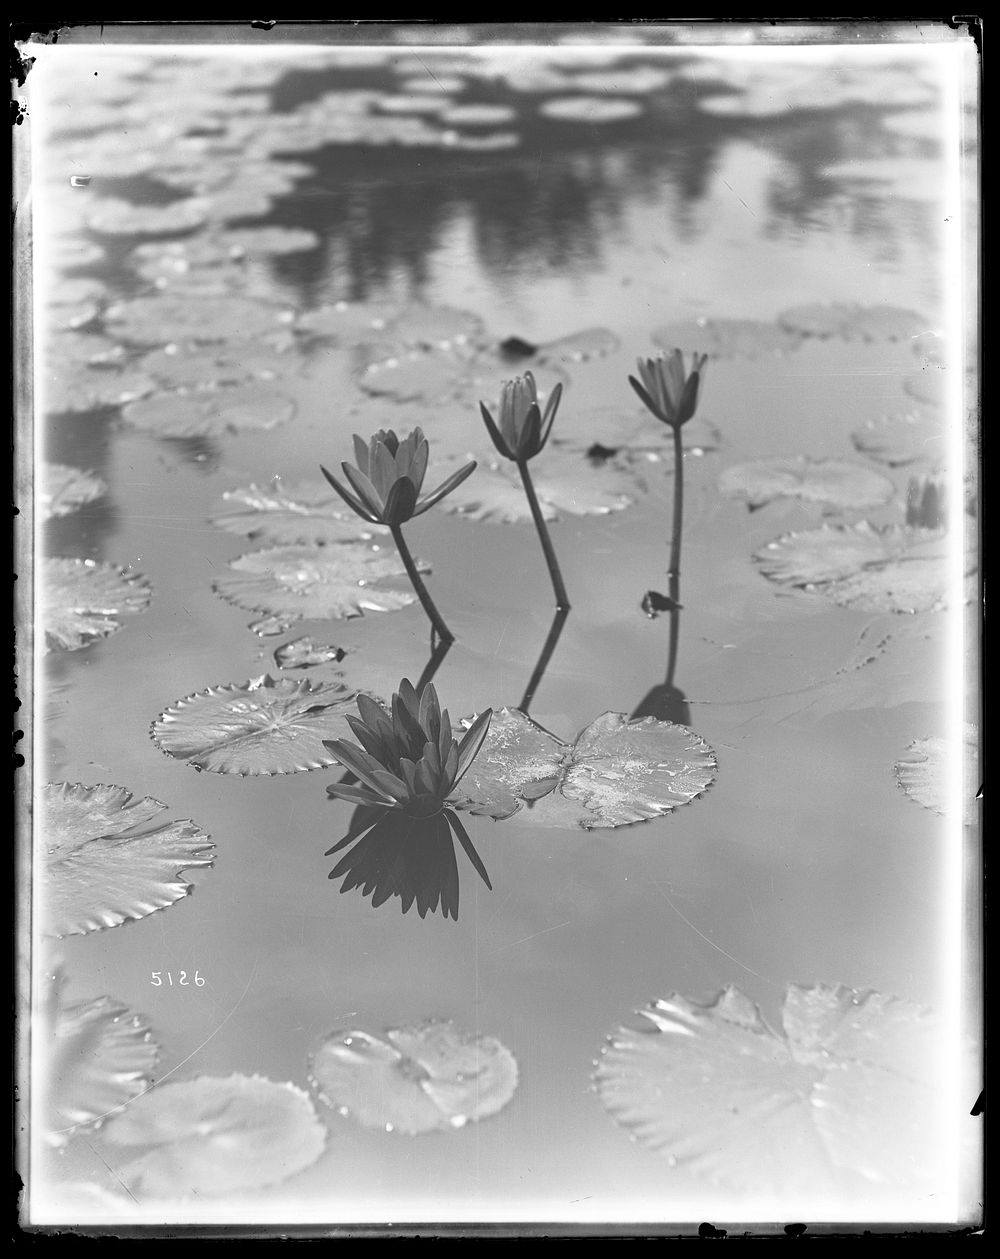 Water Lilies in United States Fish Commission Hatchery Pond